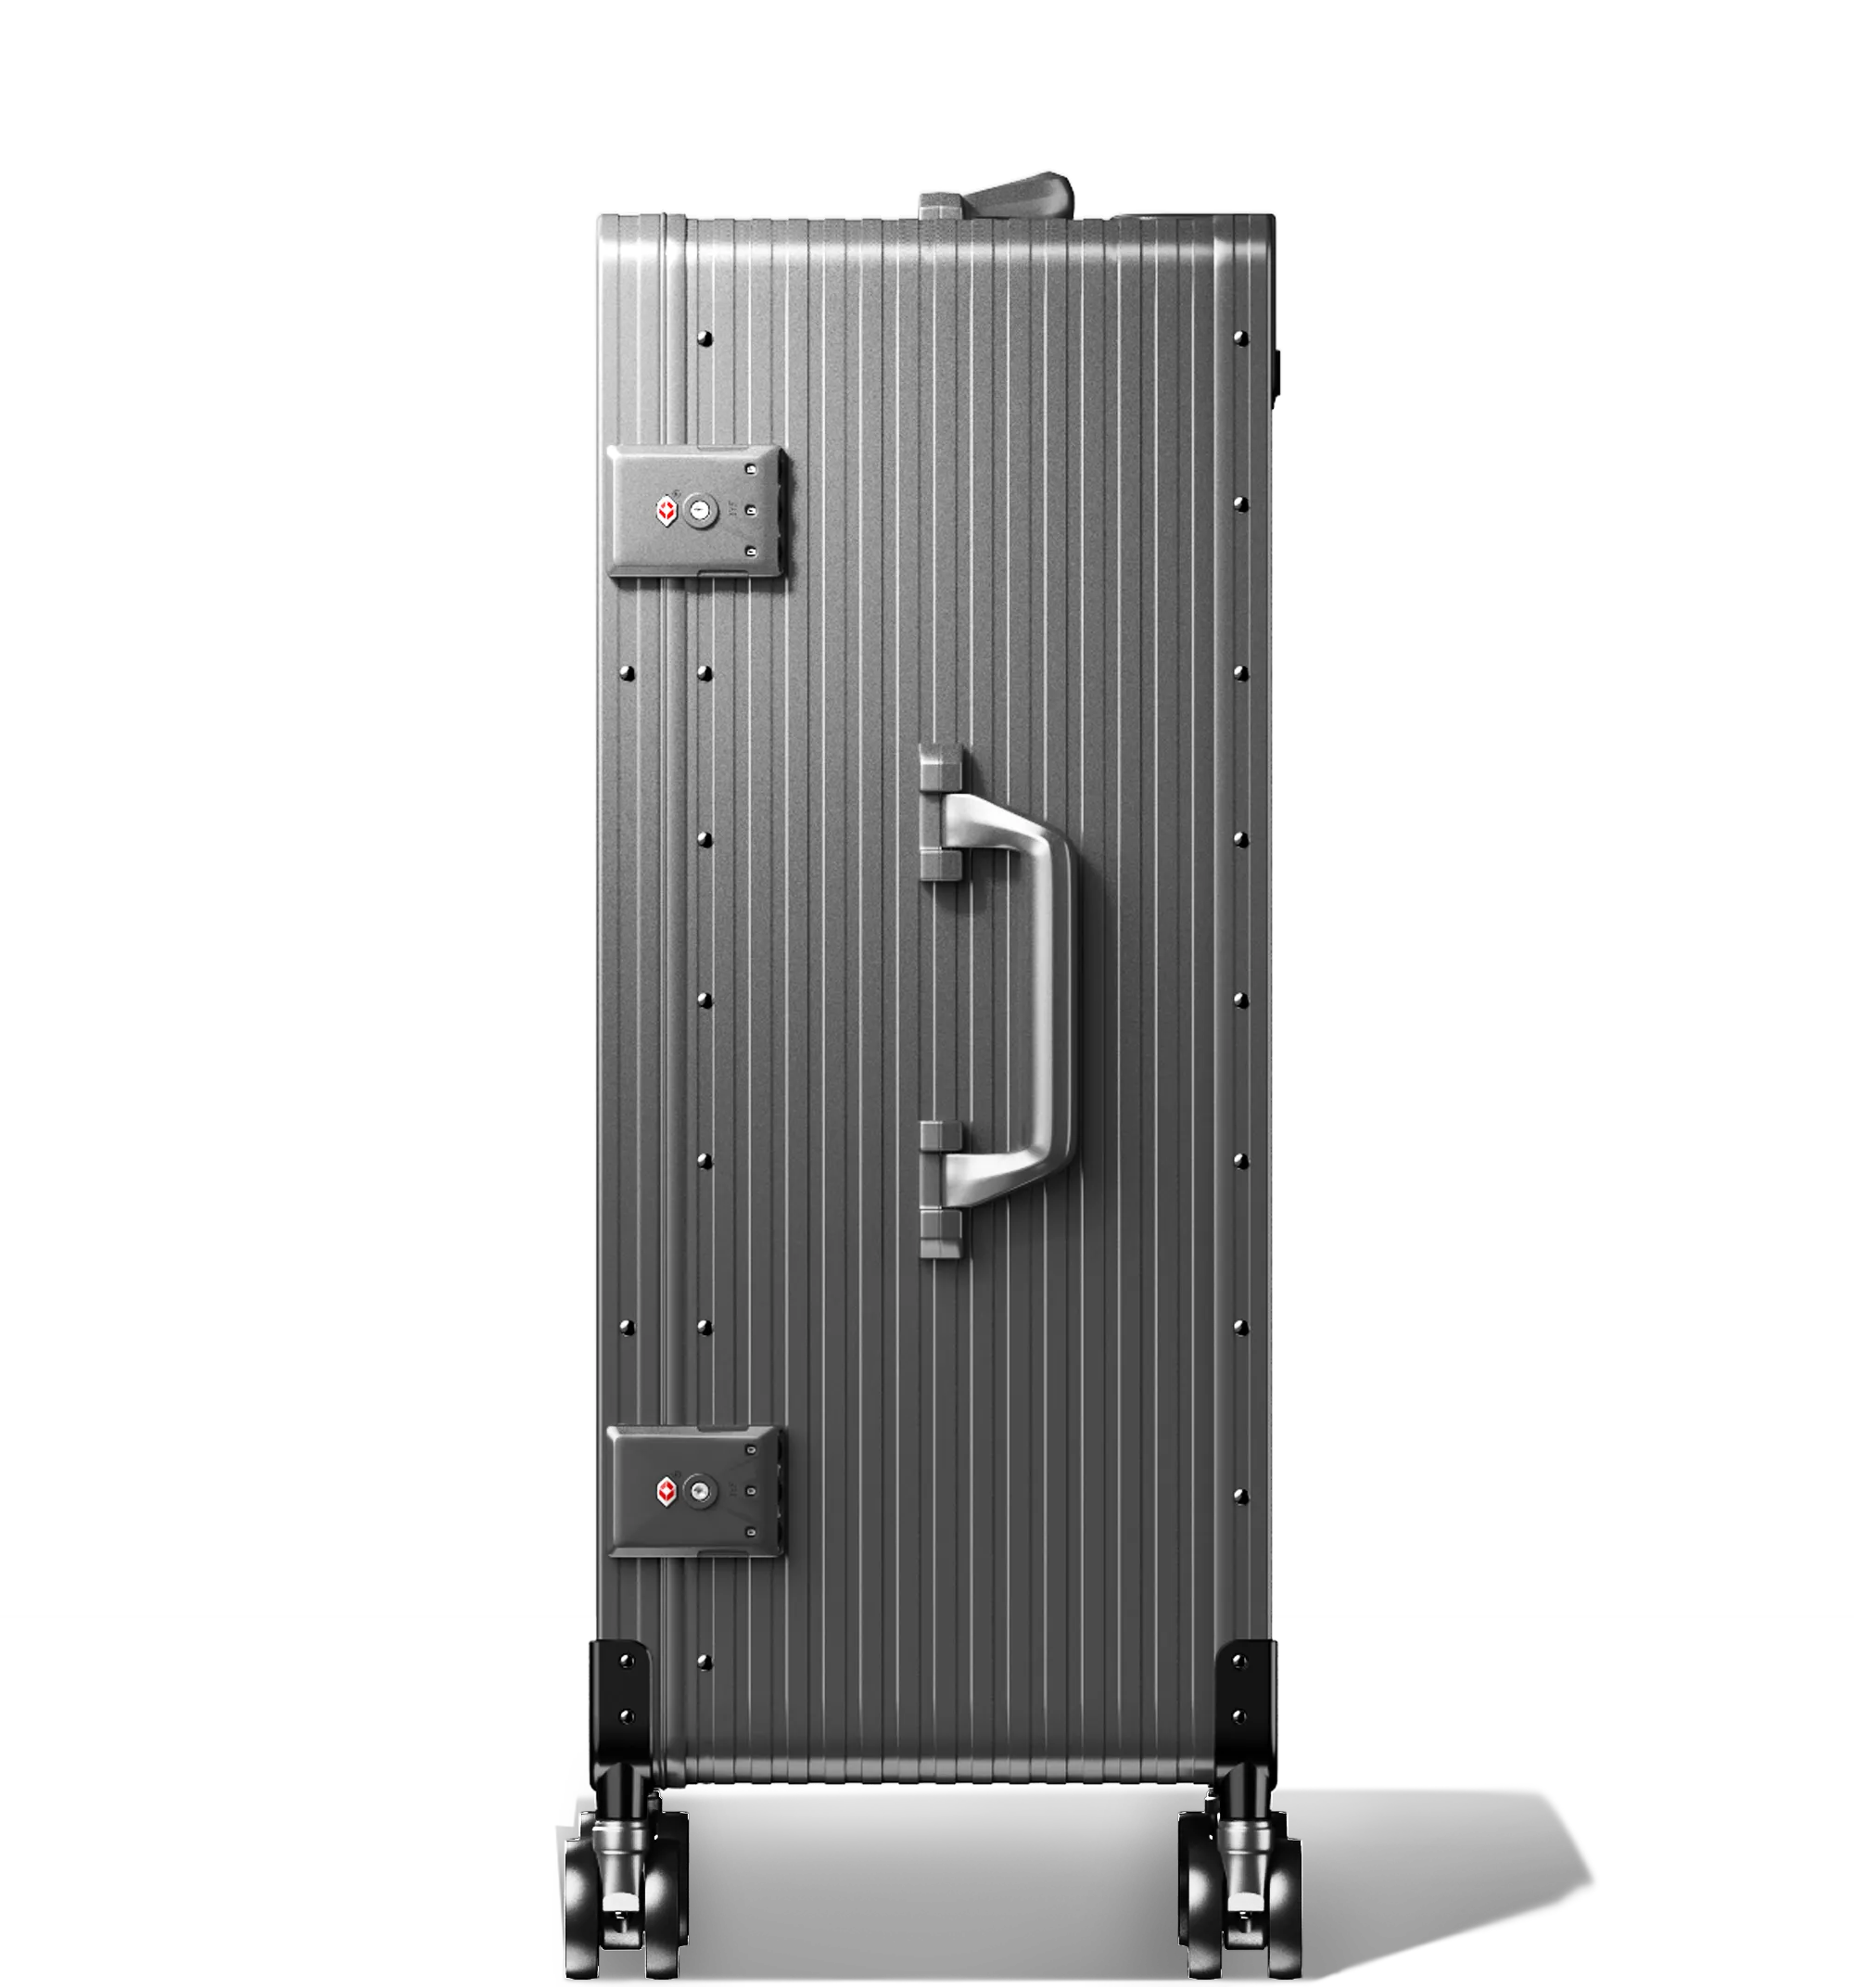 A Gun Metal Check-In 65/25 hard-shell aluminium Luggage standing upright with ribbed texture, side and top carry handles, two TSA-approved combination locks, and four spinning wheels, against a white background.